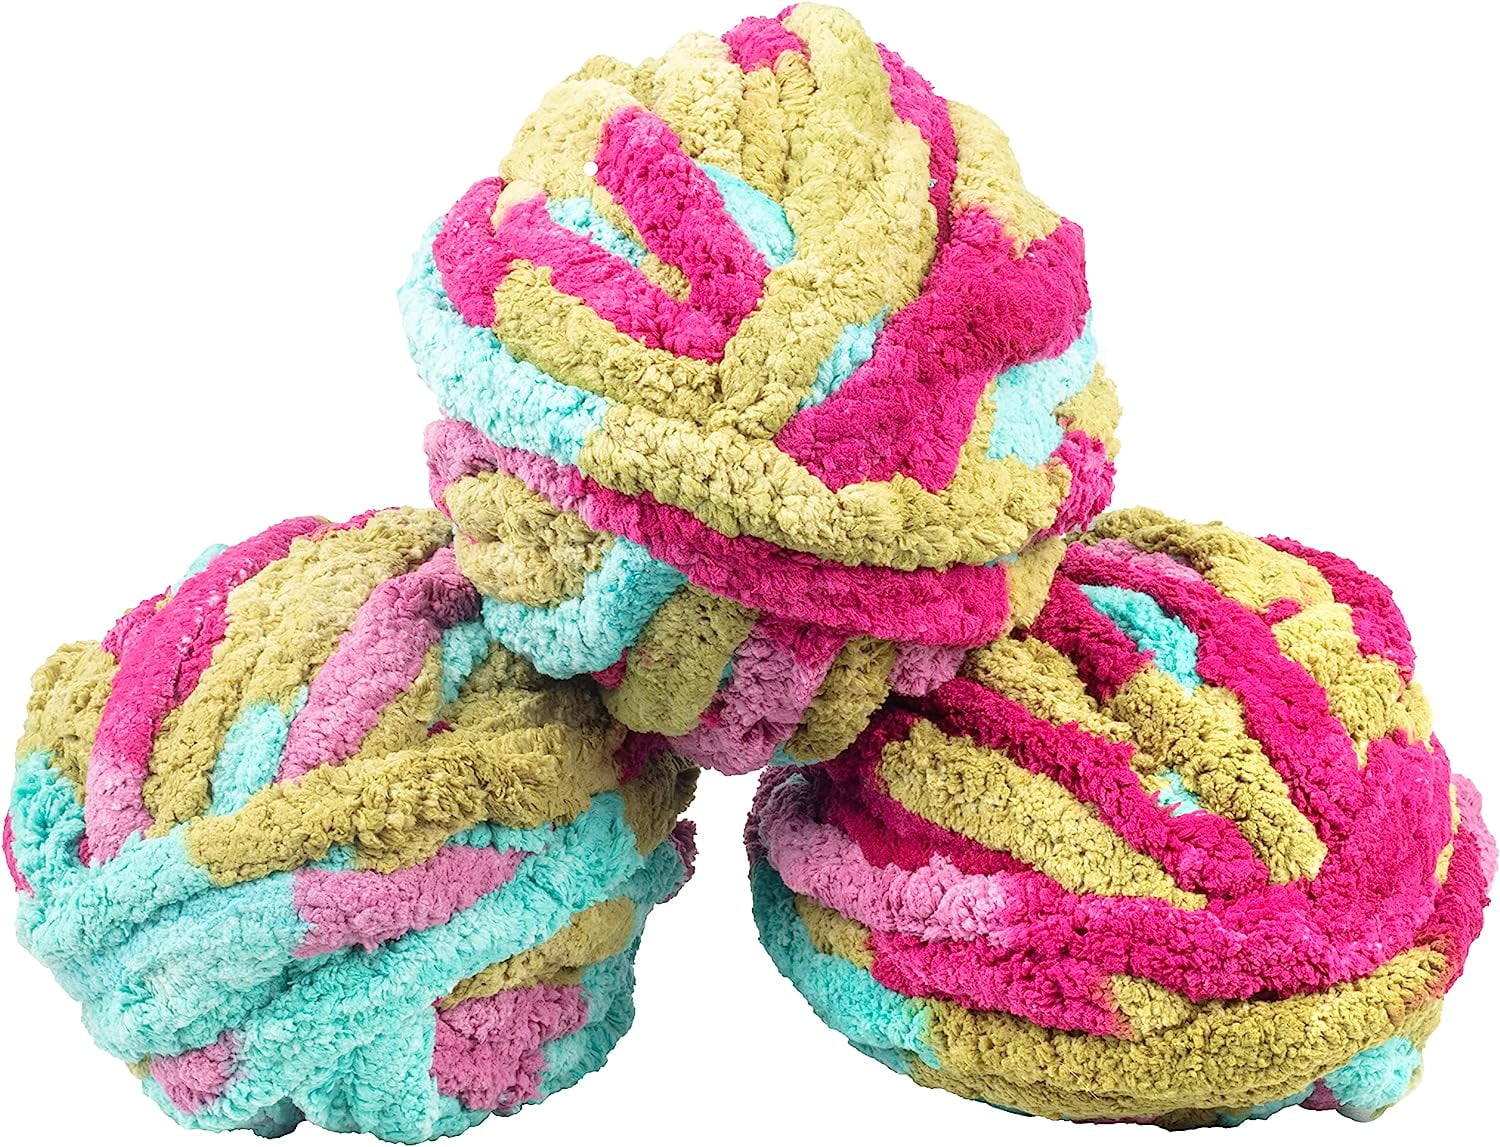 iDIY Chunky Yarn 3 Pack (24 Yards Each Skein) - Hot Pink - Fluffy Chenille  Yarn Perfect for Soft Throw and Baby Blankets, Arm Knitting, Crocheting and  DIY Craft